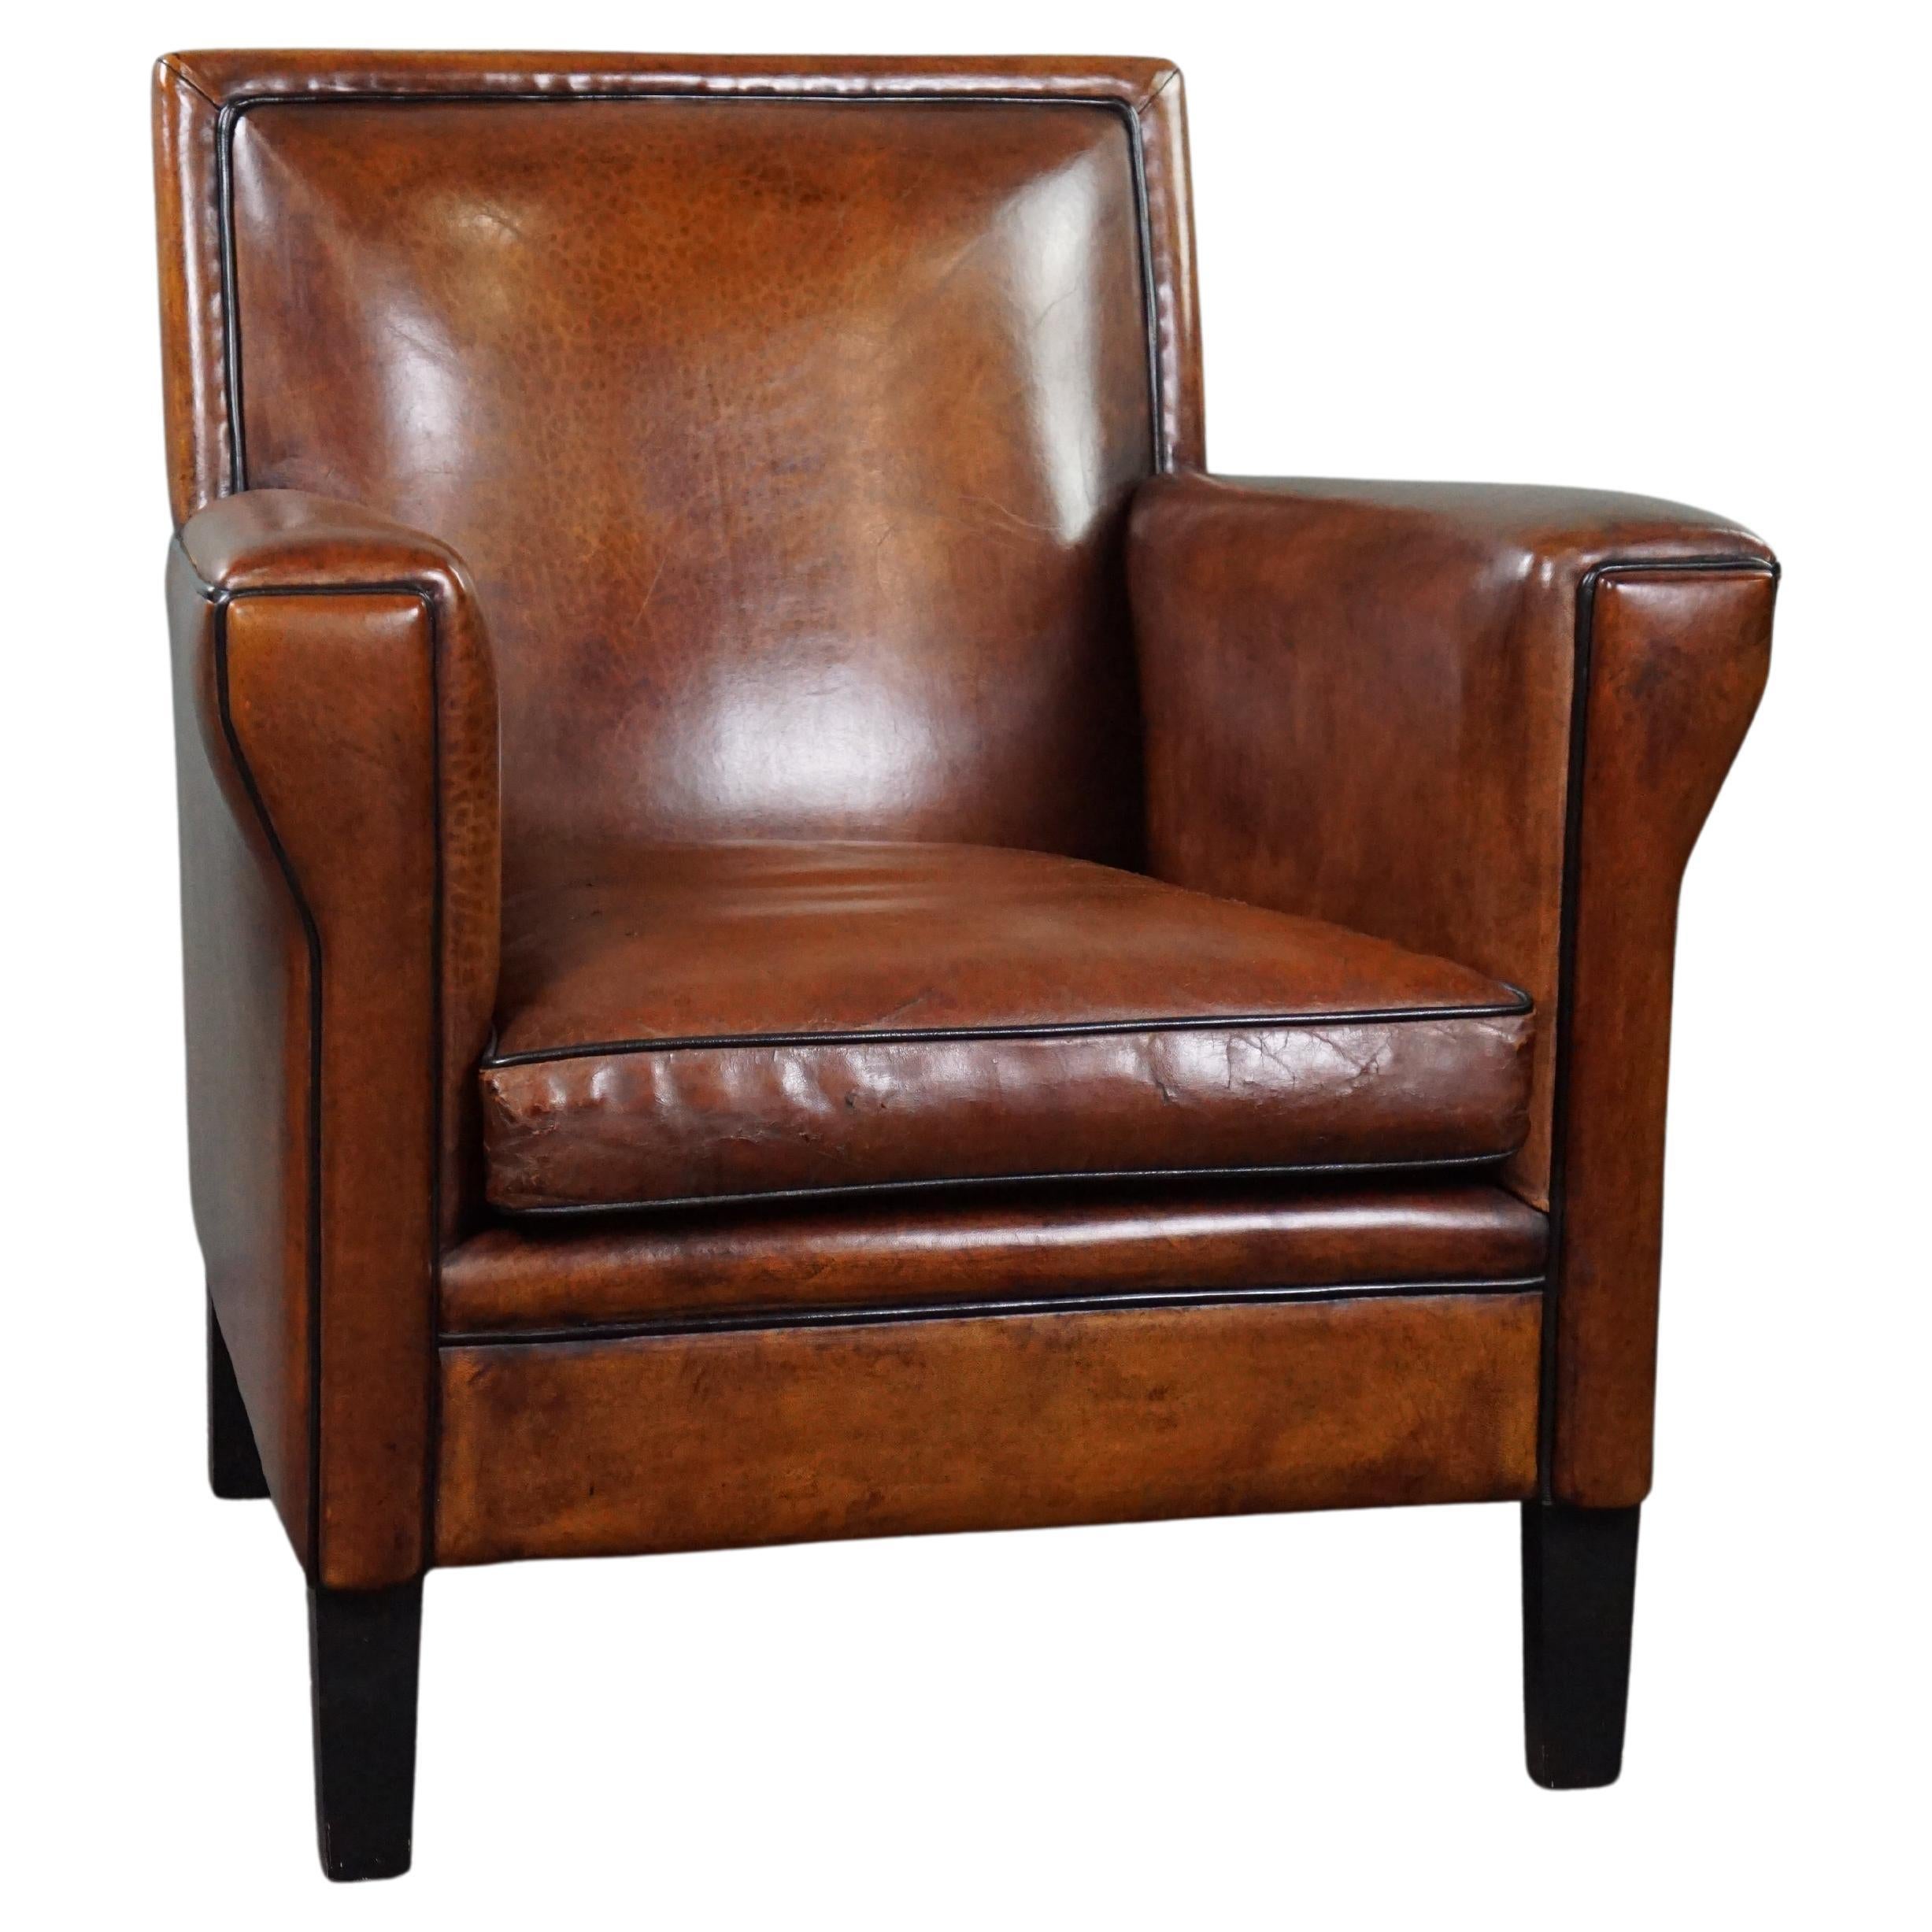 Amazing sheep leather armchair in Art Deco style with warm colors For Sale